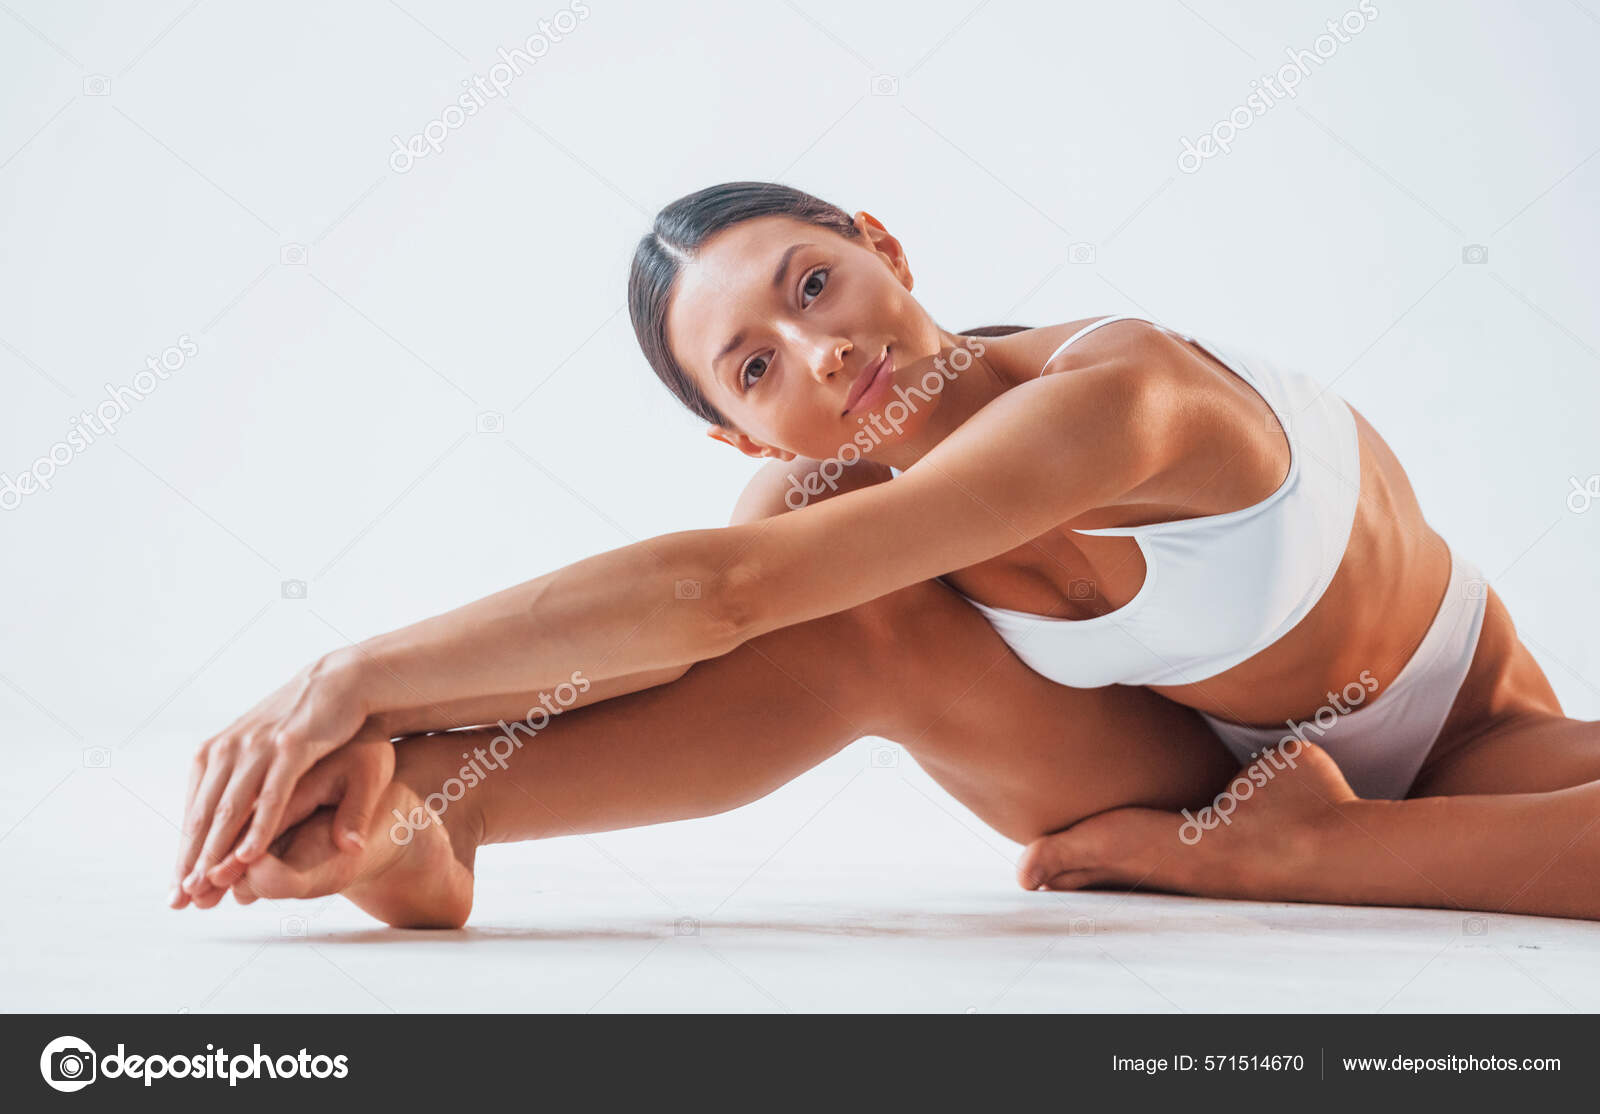 Young Girl Doing Exercises Underwear On Stock Photo 1028889199